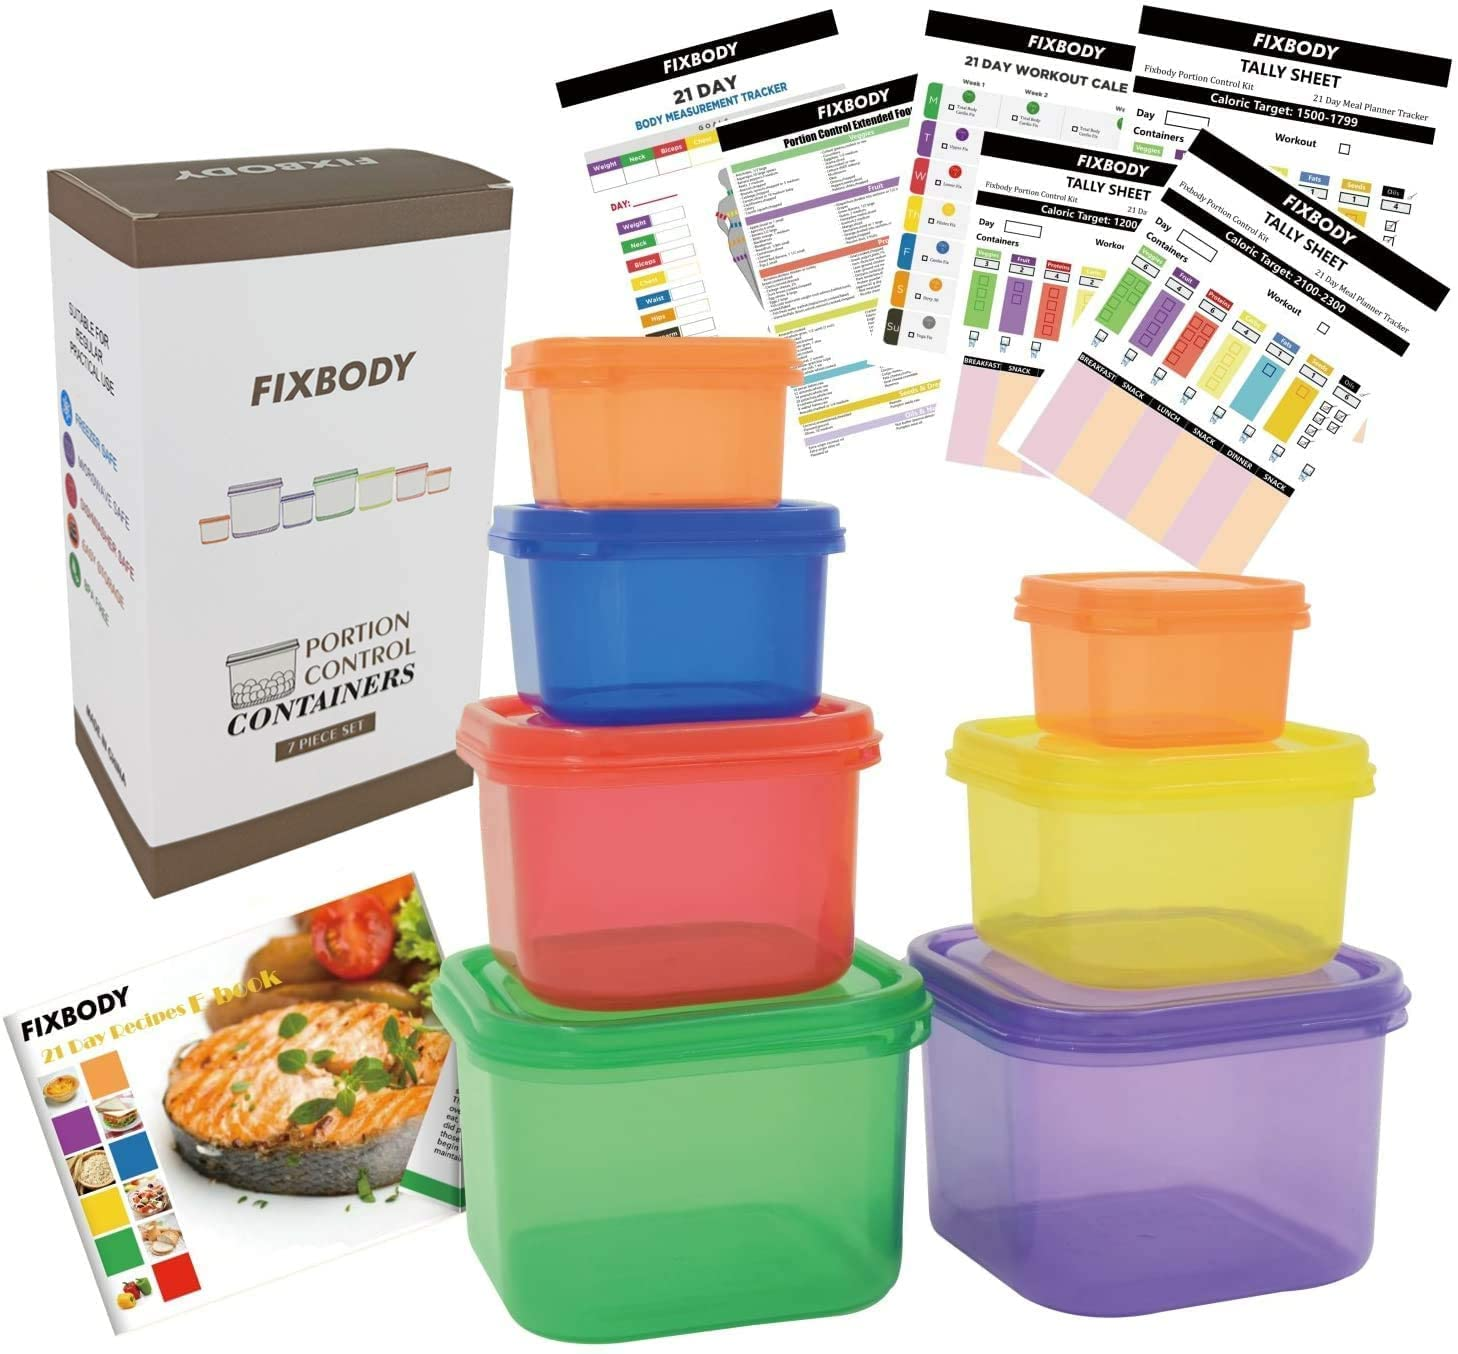 FIXBODY 7PCS Portion Control 21 Indefinitely Labeled Containers Color-Coded Ranking TOP20